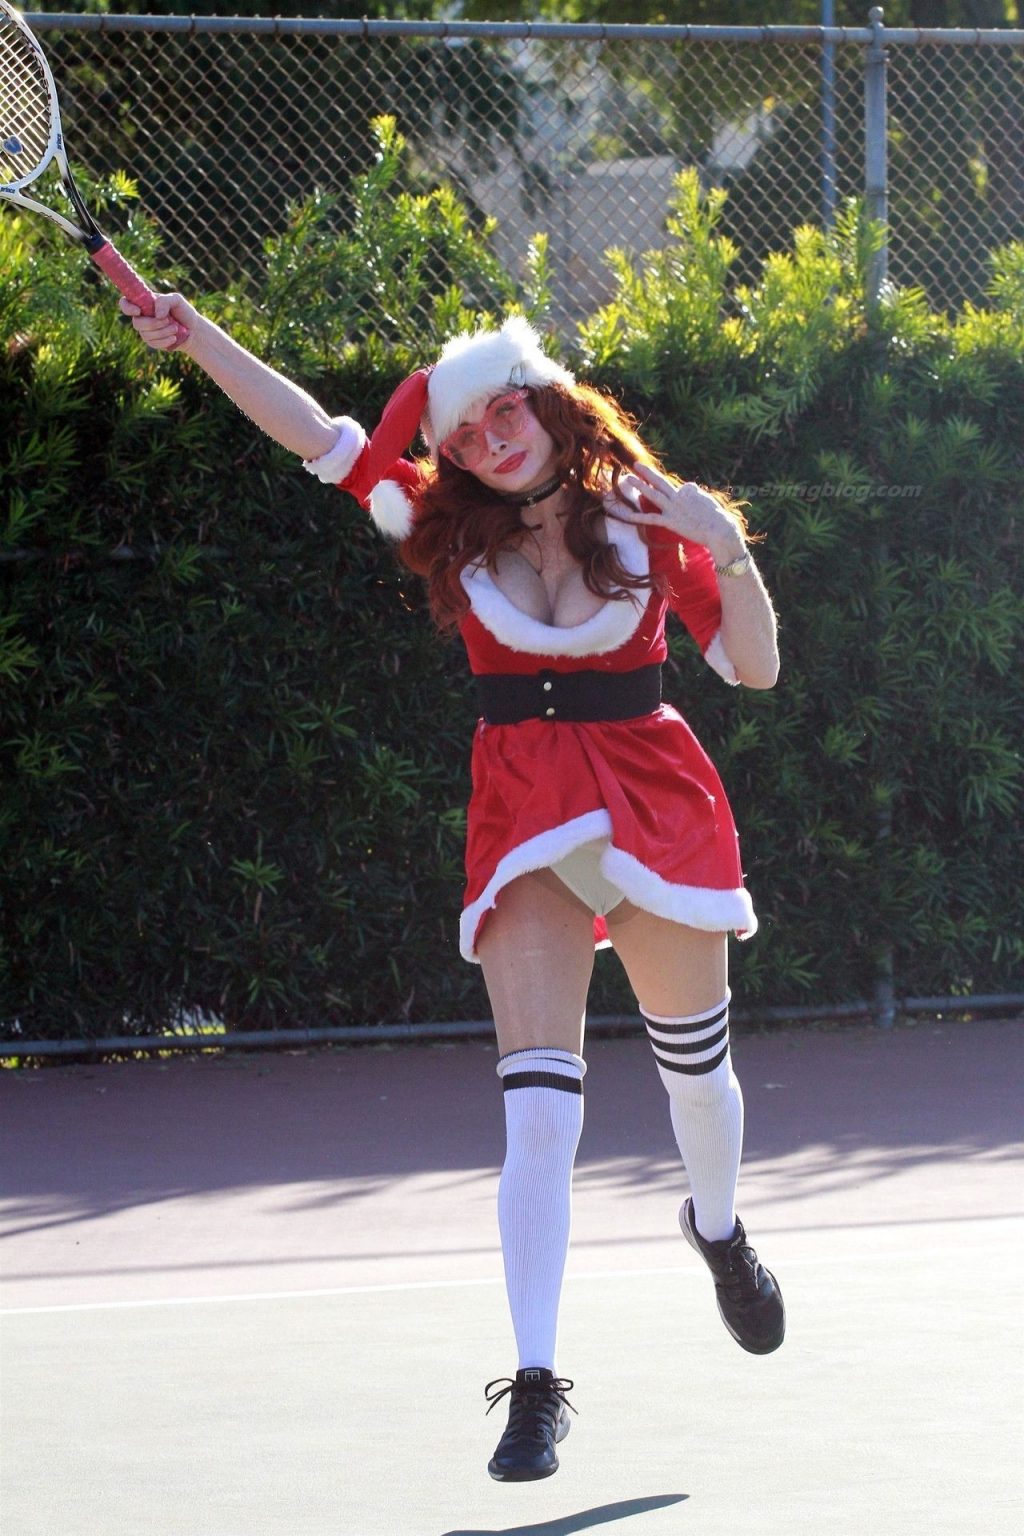 Phoebe Price is Seen in a Mrs. Claus Outfit at the Tennis Courts in LA (55 Photos)